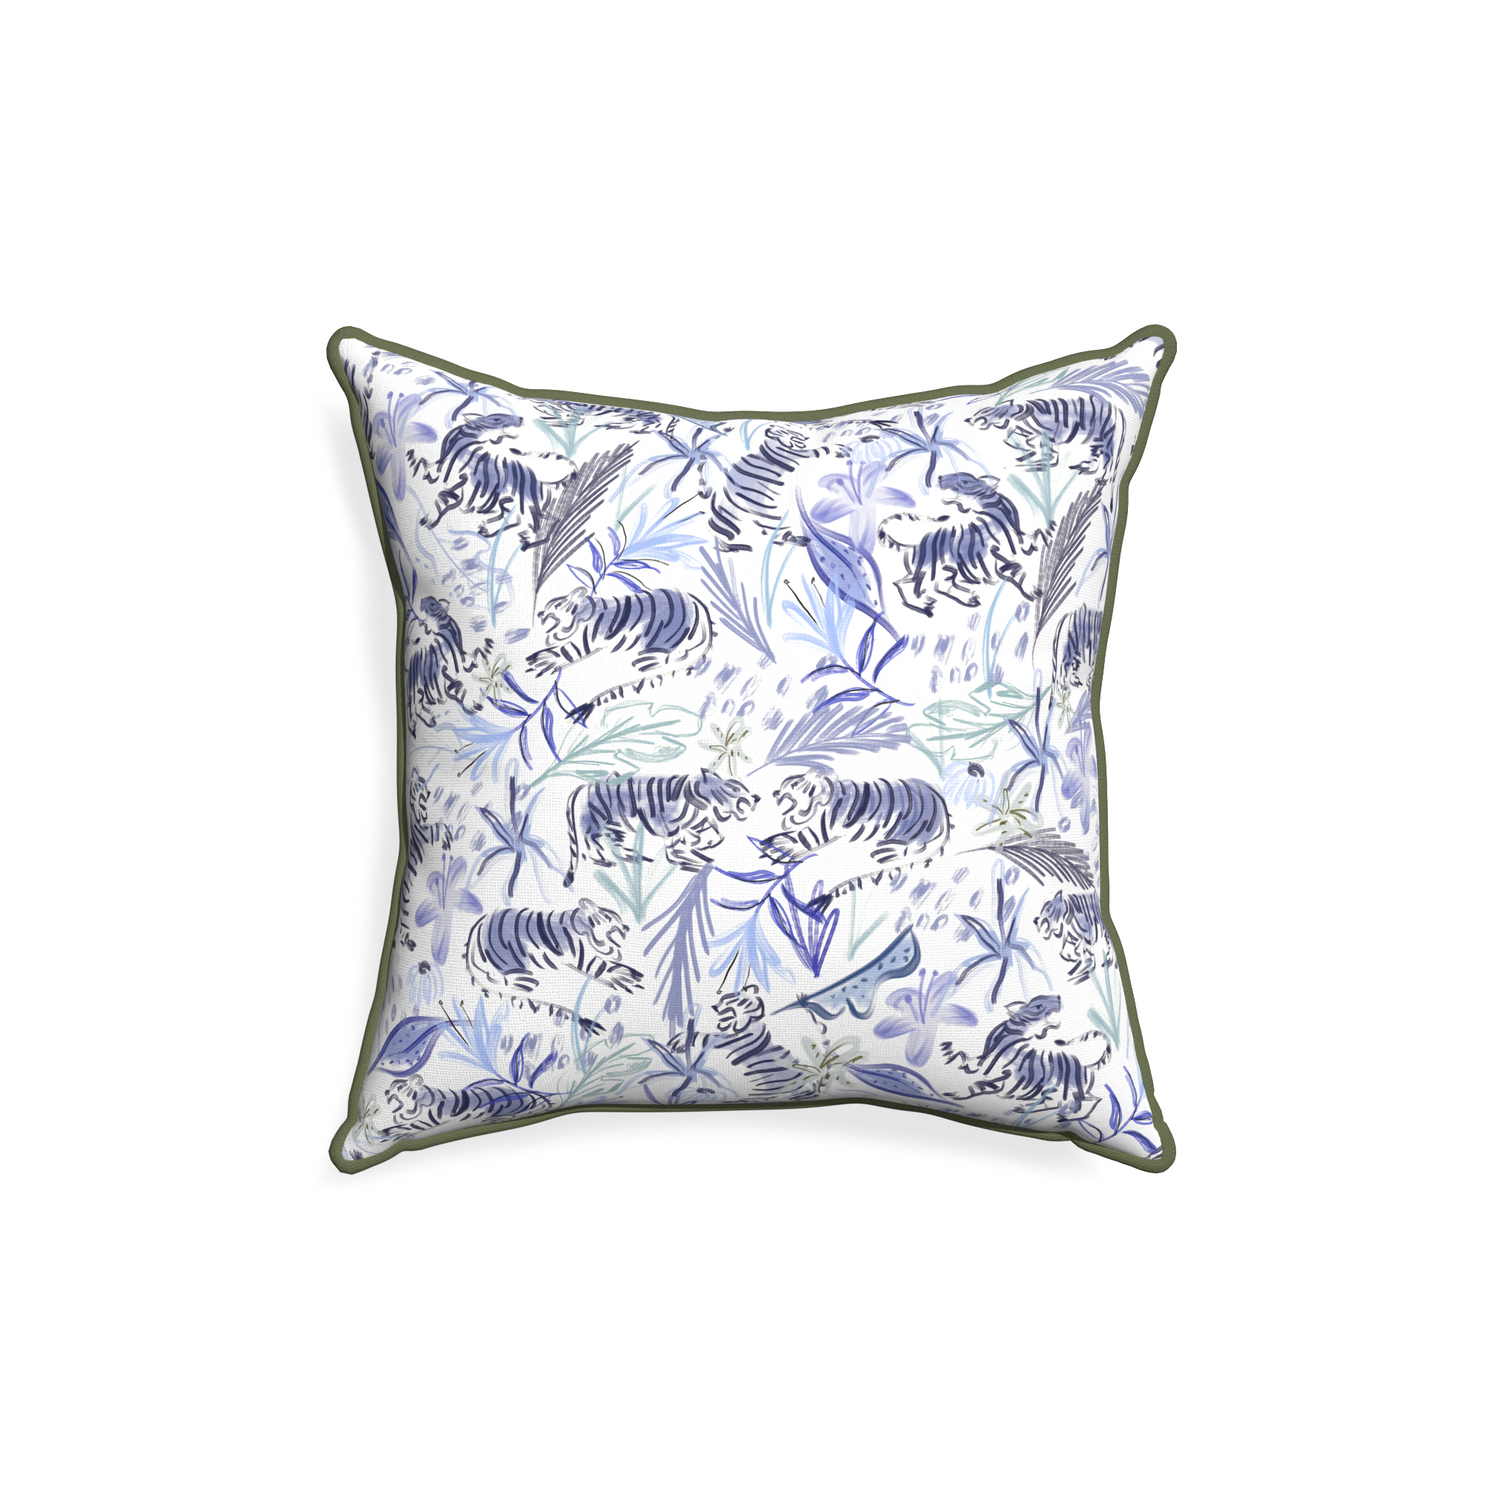 18-square frida blue custom blue with intricate tiger designpillow with f piping on white background